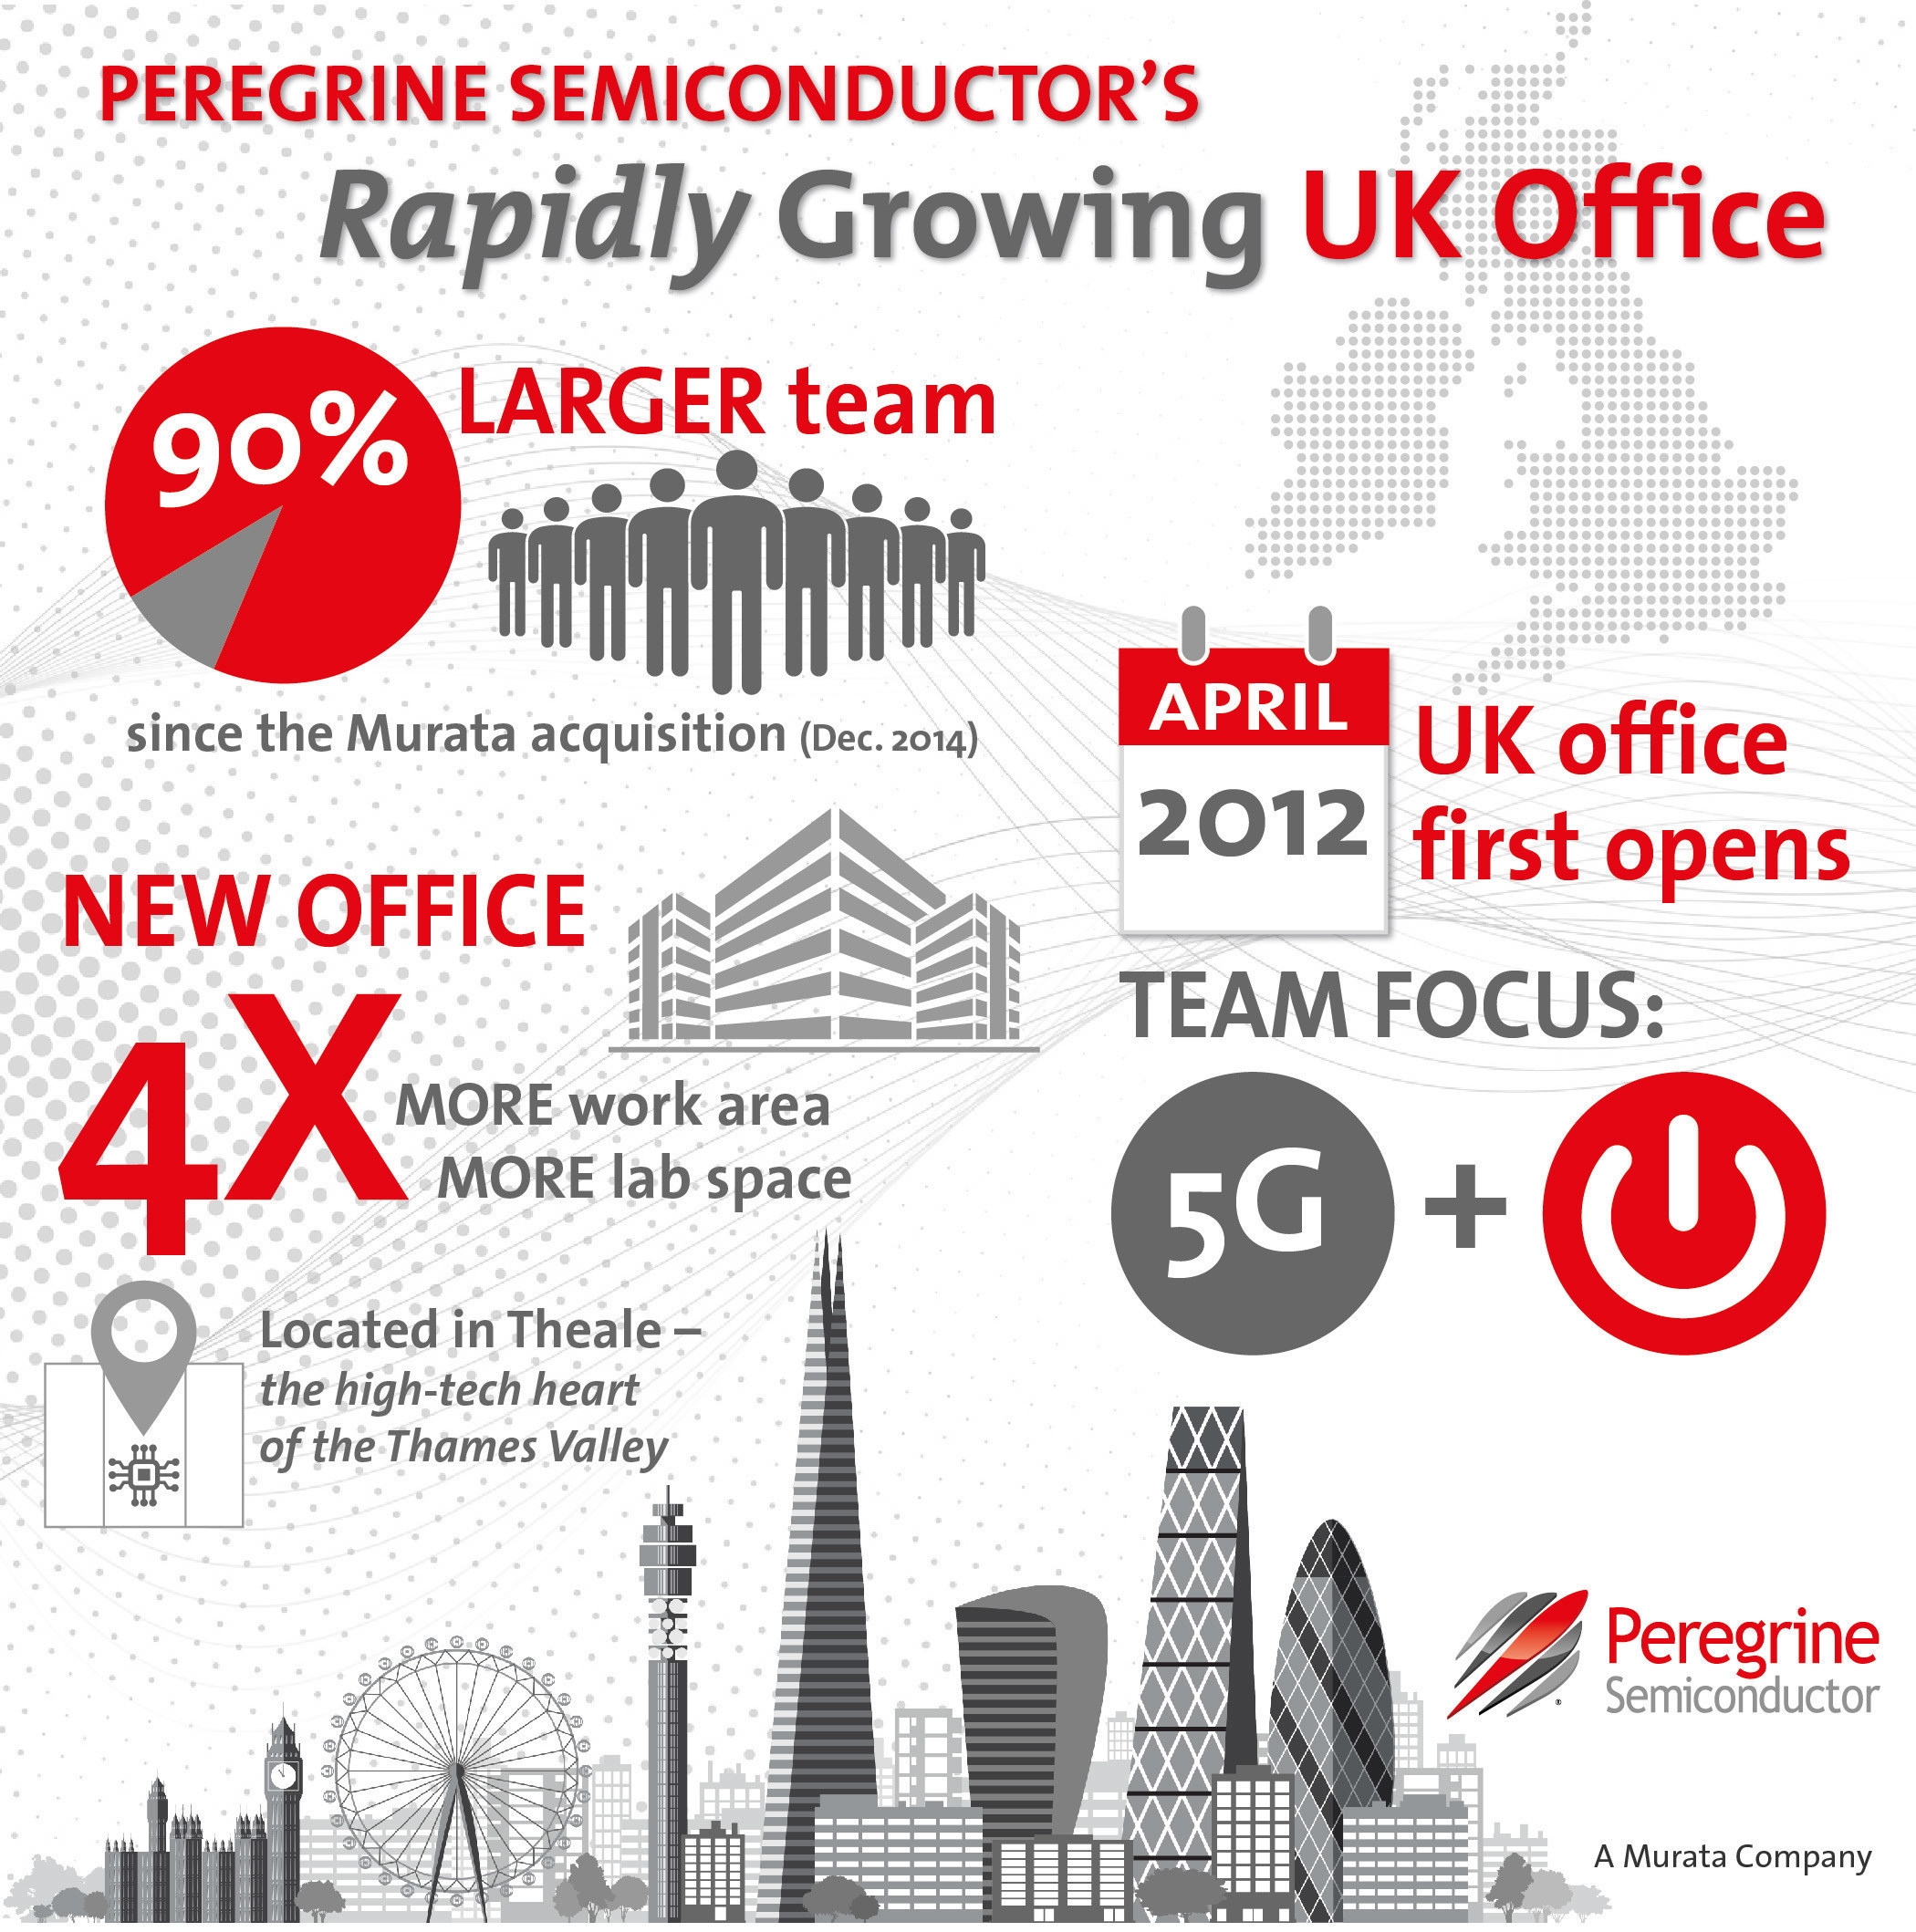 Peregrine Semiconductor&apos;s rapidly growing United Kingdom team has moved into a larger office facility, quadrupling the team&apos;s working area and lab space. (PRNewsFoto/Peregrine Semiconductor Corp.)